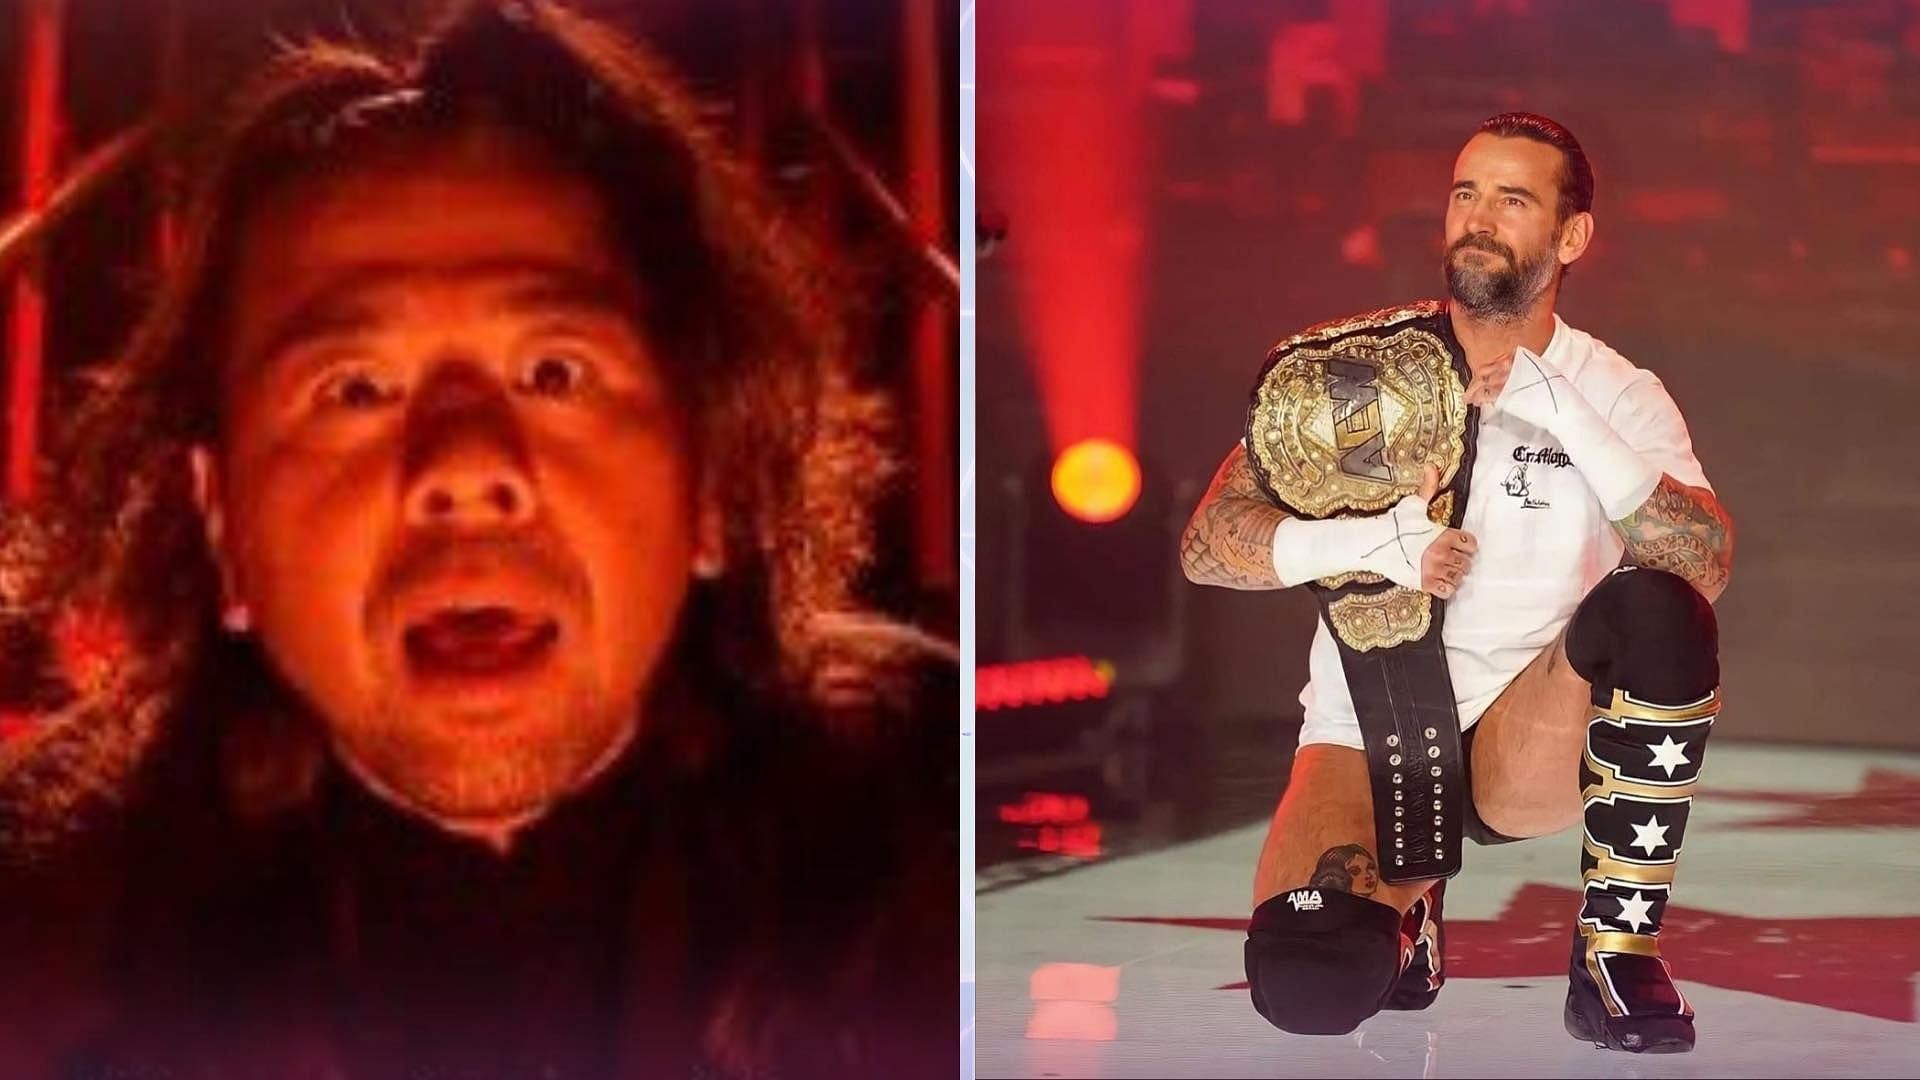 Shinsuke Nakamua appears to be calling out somebody on WWE RAW